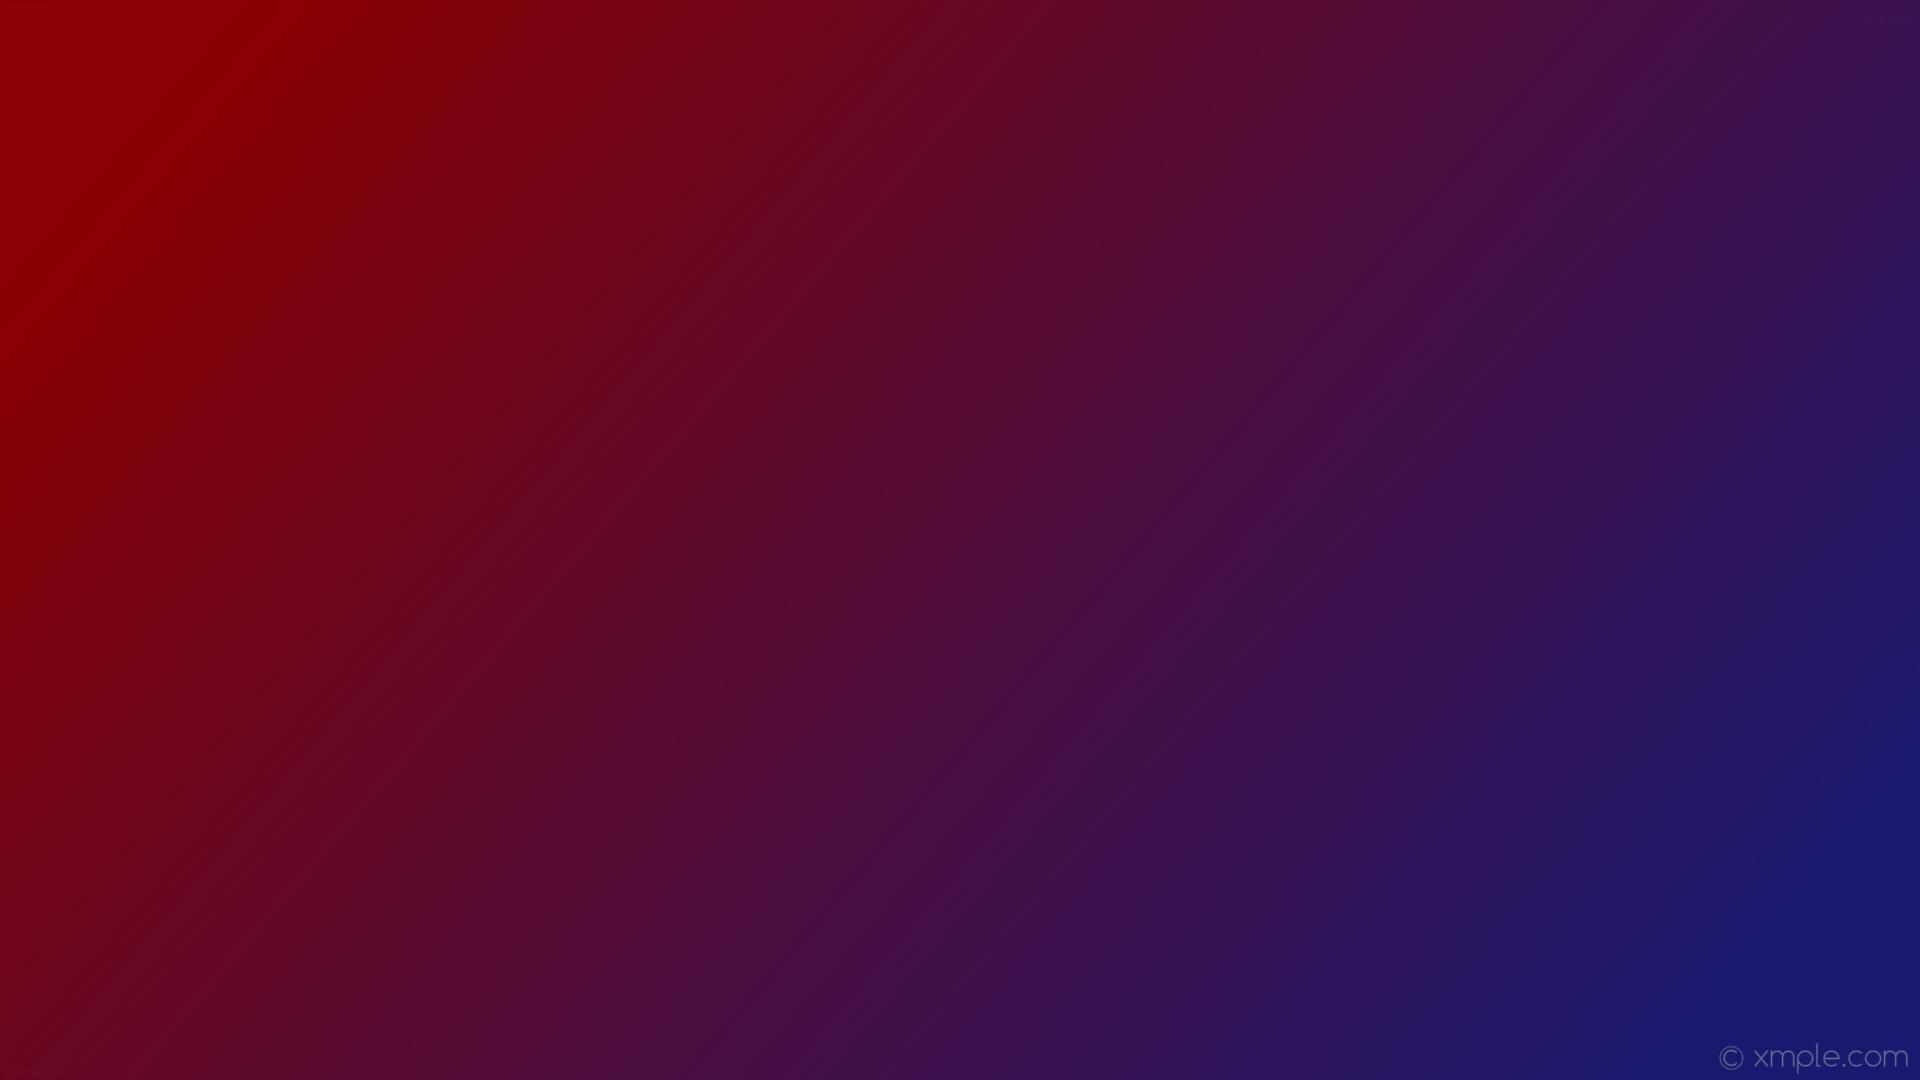 Blue and Red Wallpaper